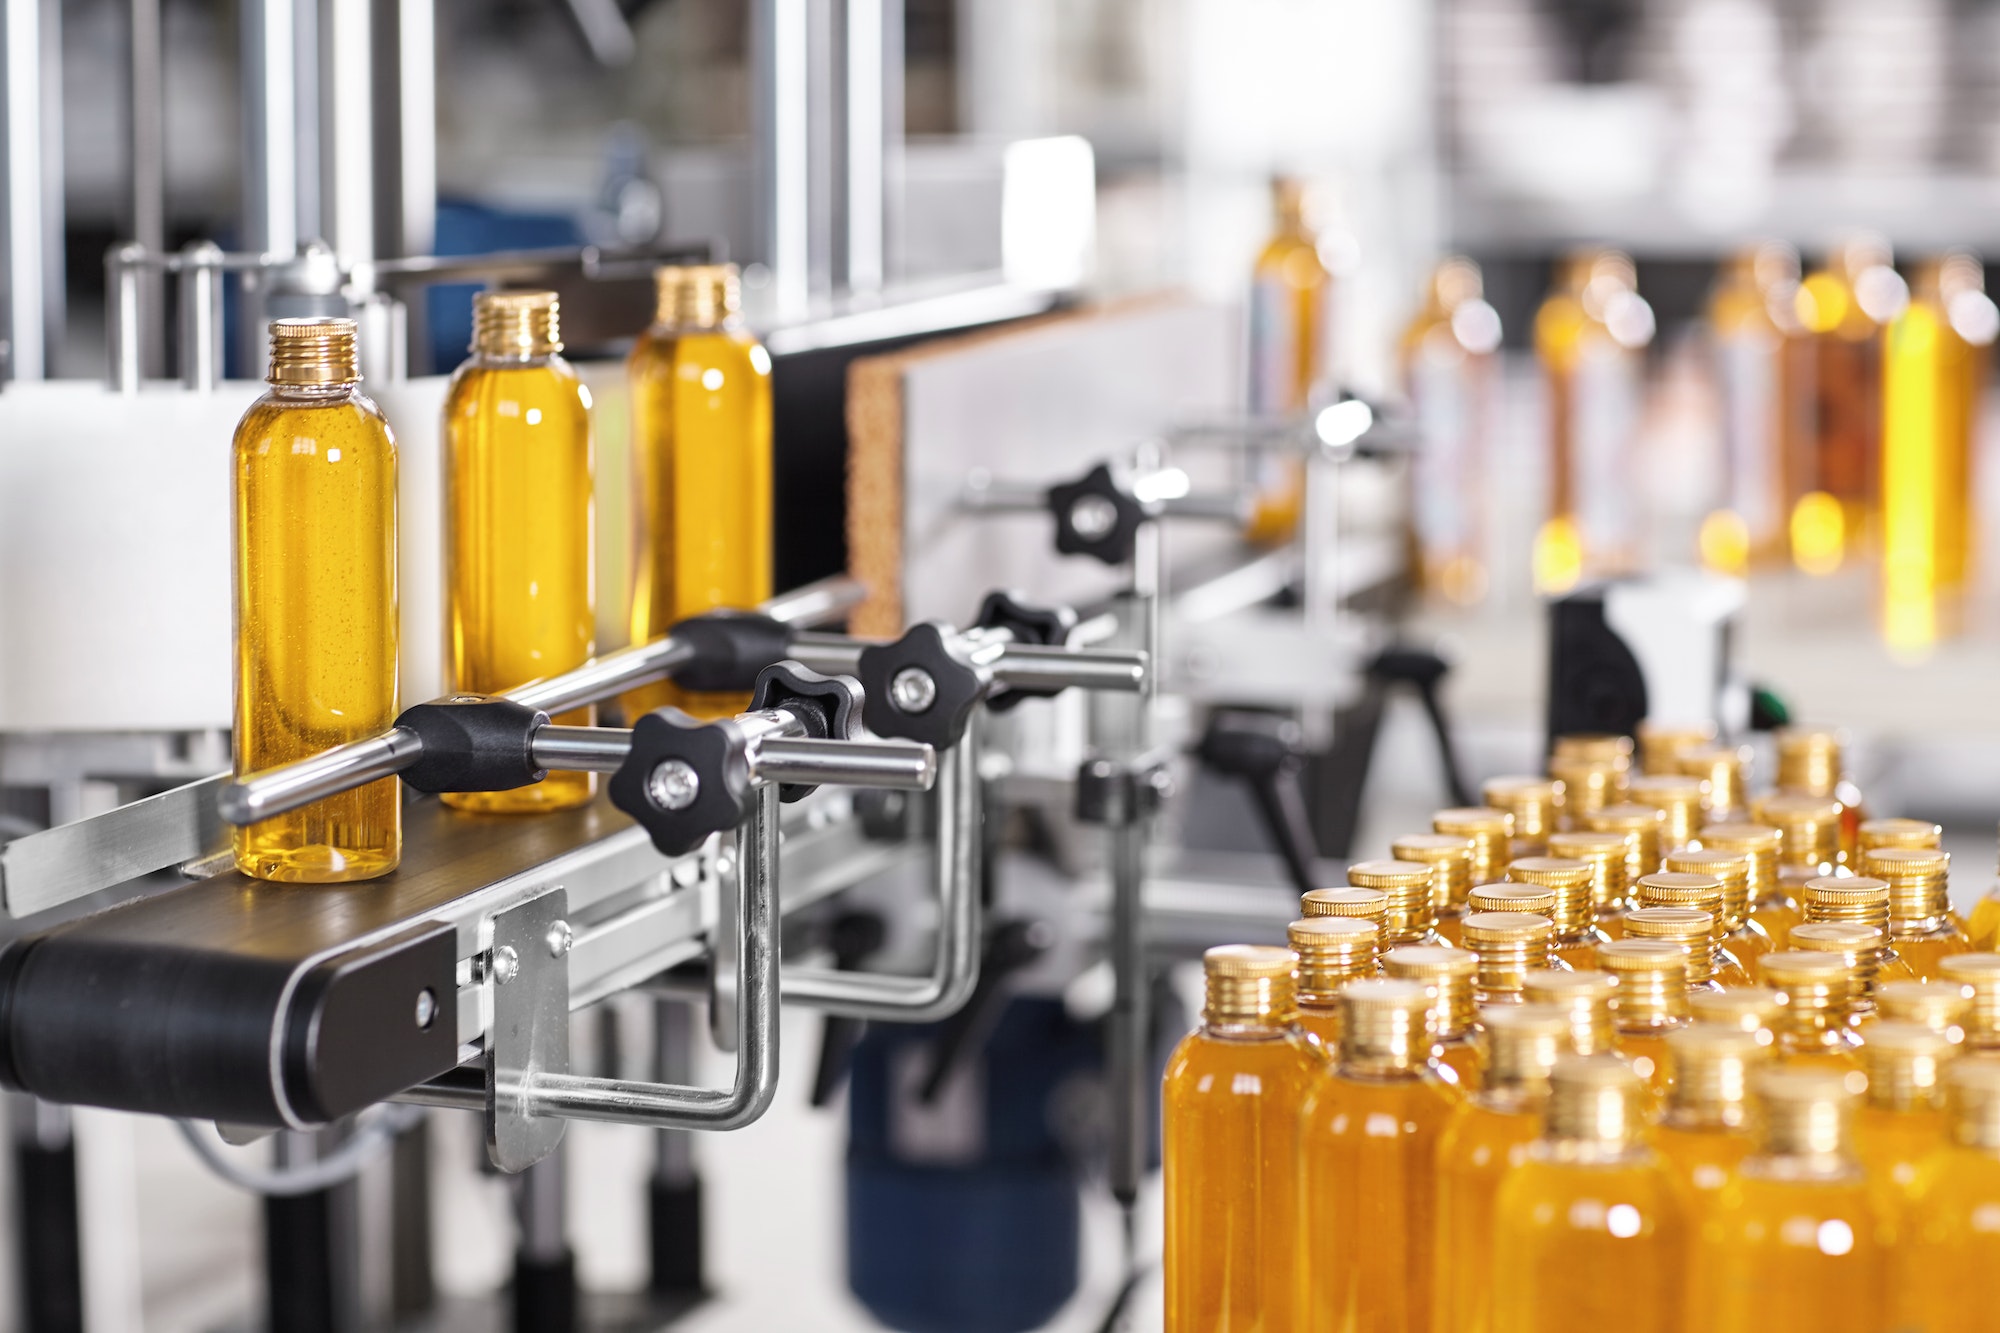 Production line of beauty and healthcare products at plant or factory. Process of manufacturing and